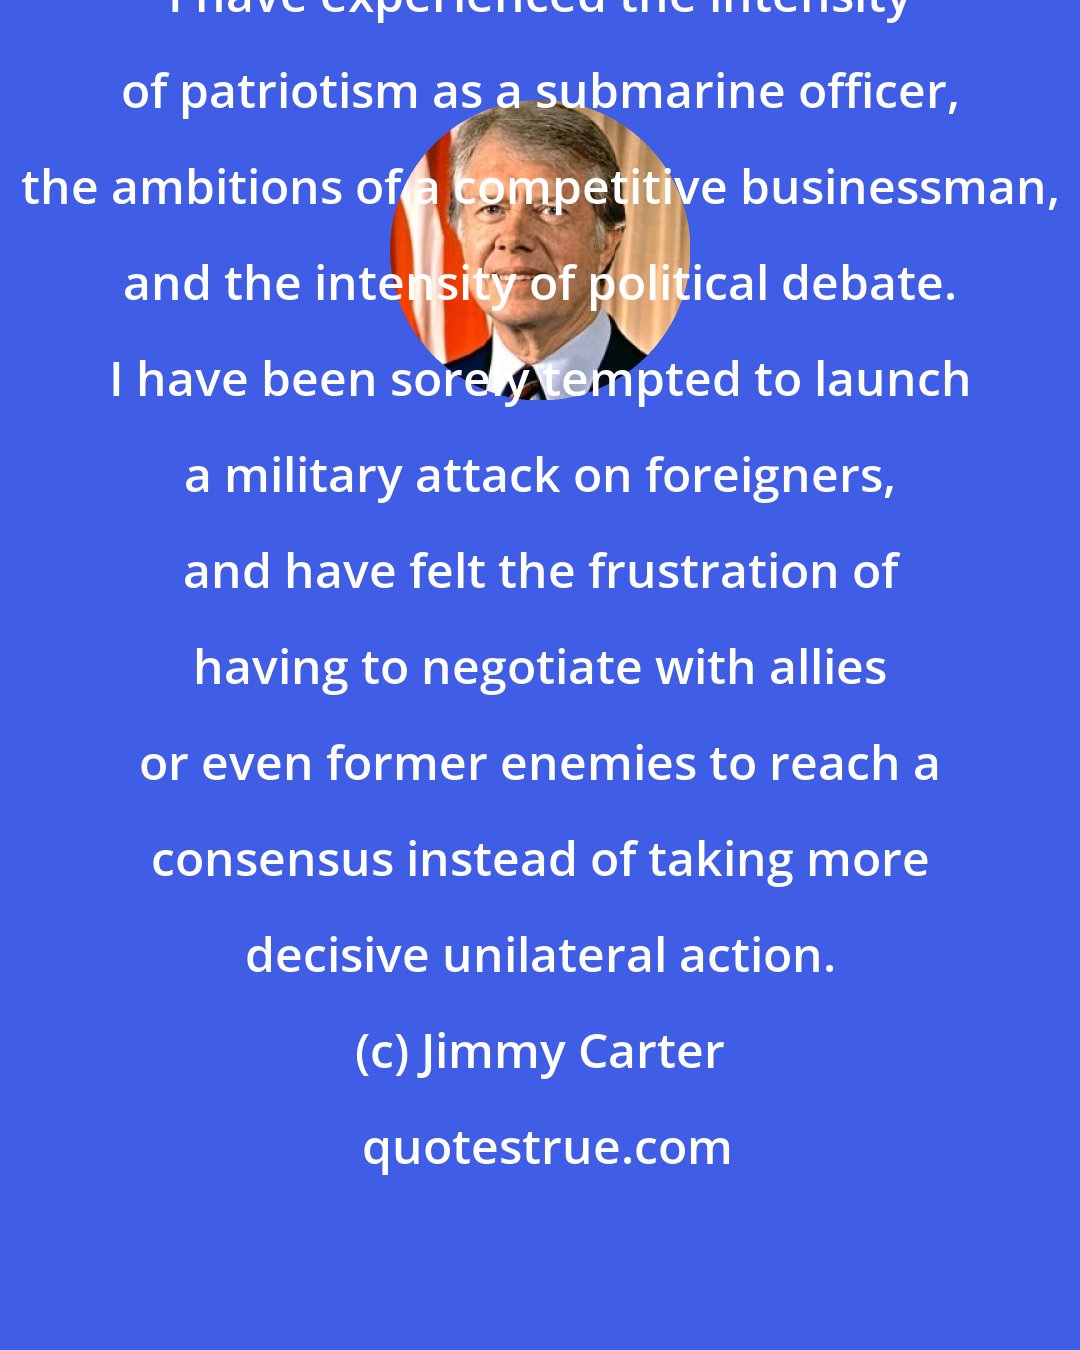 Jimmy Carter: I have experienced the intensity of patriotism as a submarine officer, the ambitions of a competitive businessman, and the intensity of political debate. I have been sorely tempted to launch a military attack on foreigners, and have felt the frustration of having to negotiate with allies or even former enemies to reach a consensus instead of taking more decisive unilateral action.